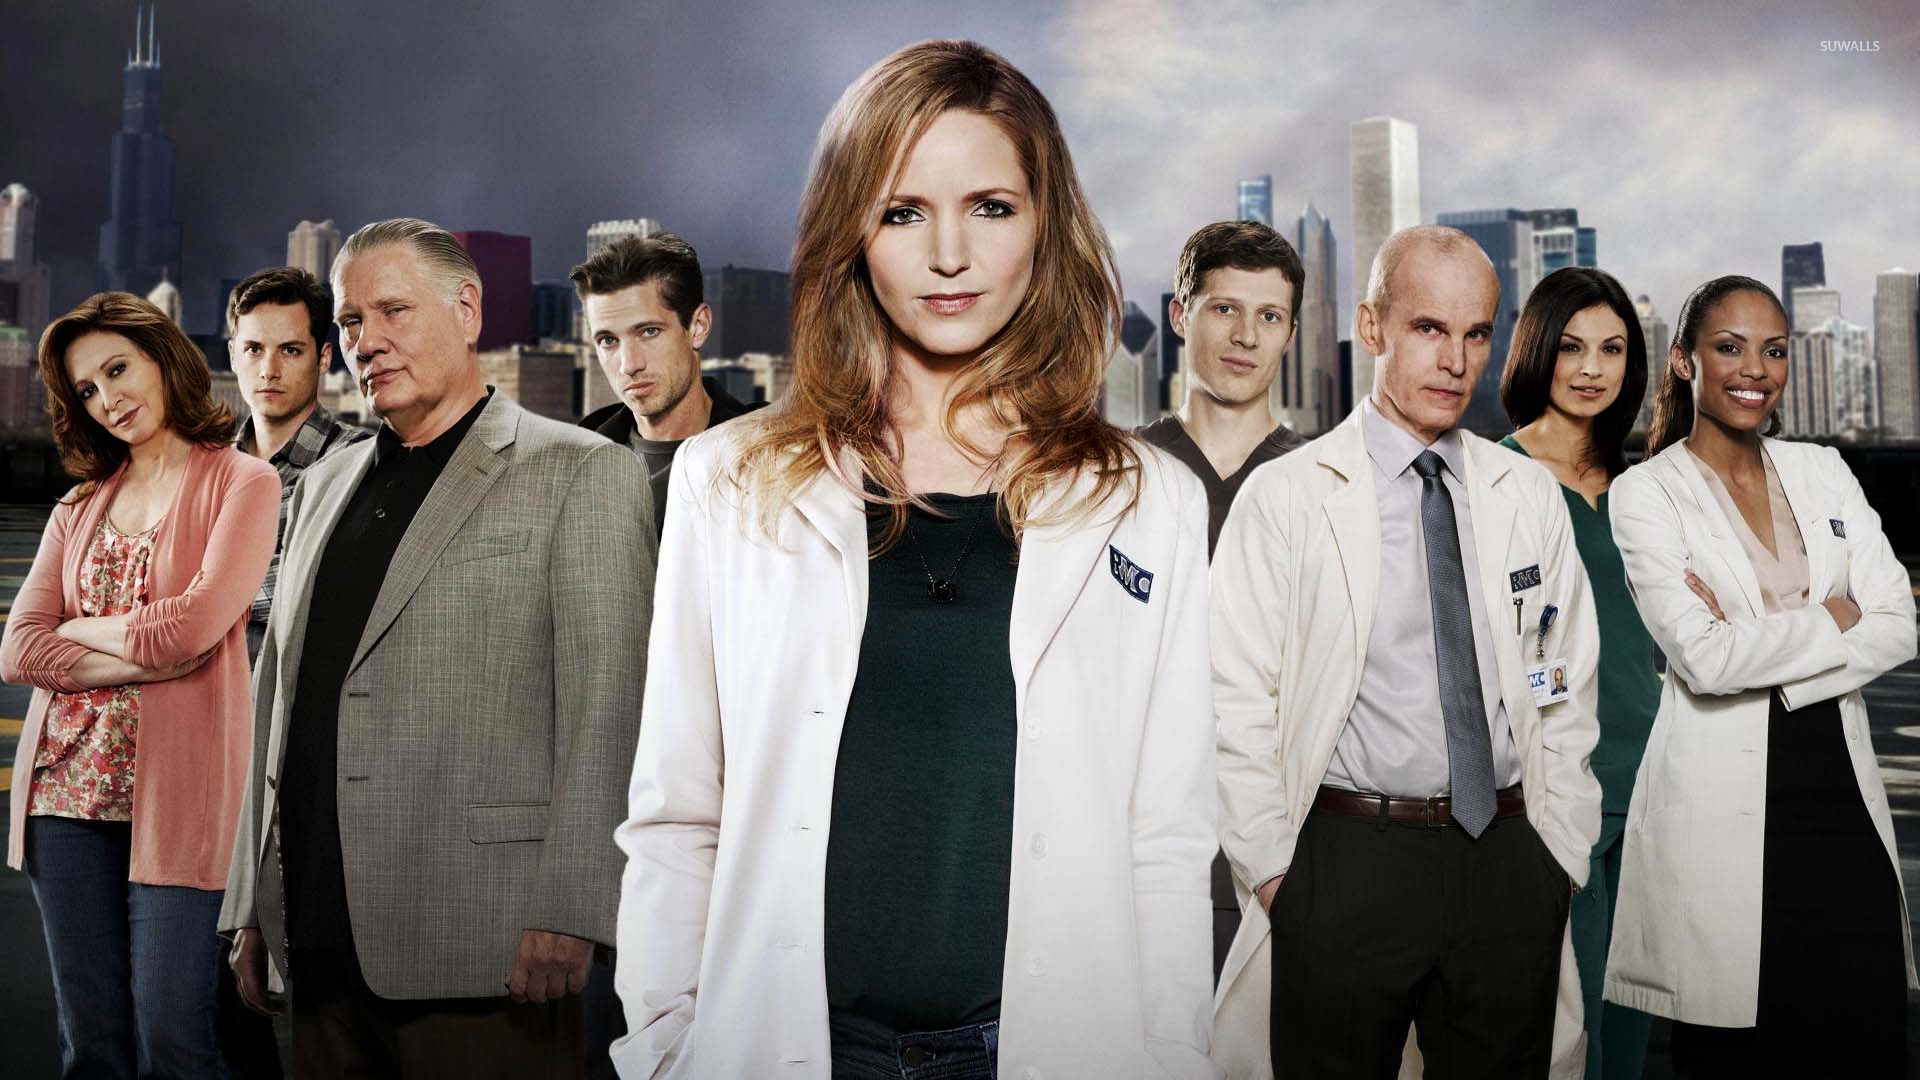 The Mob Doctor wallpaper - TV Show wallpapers - #20379